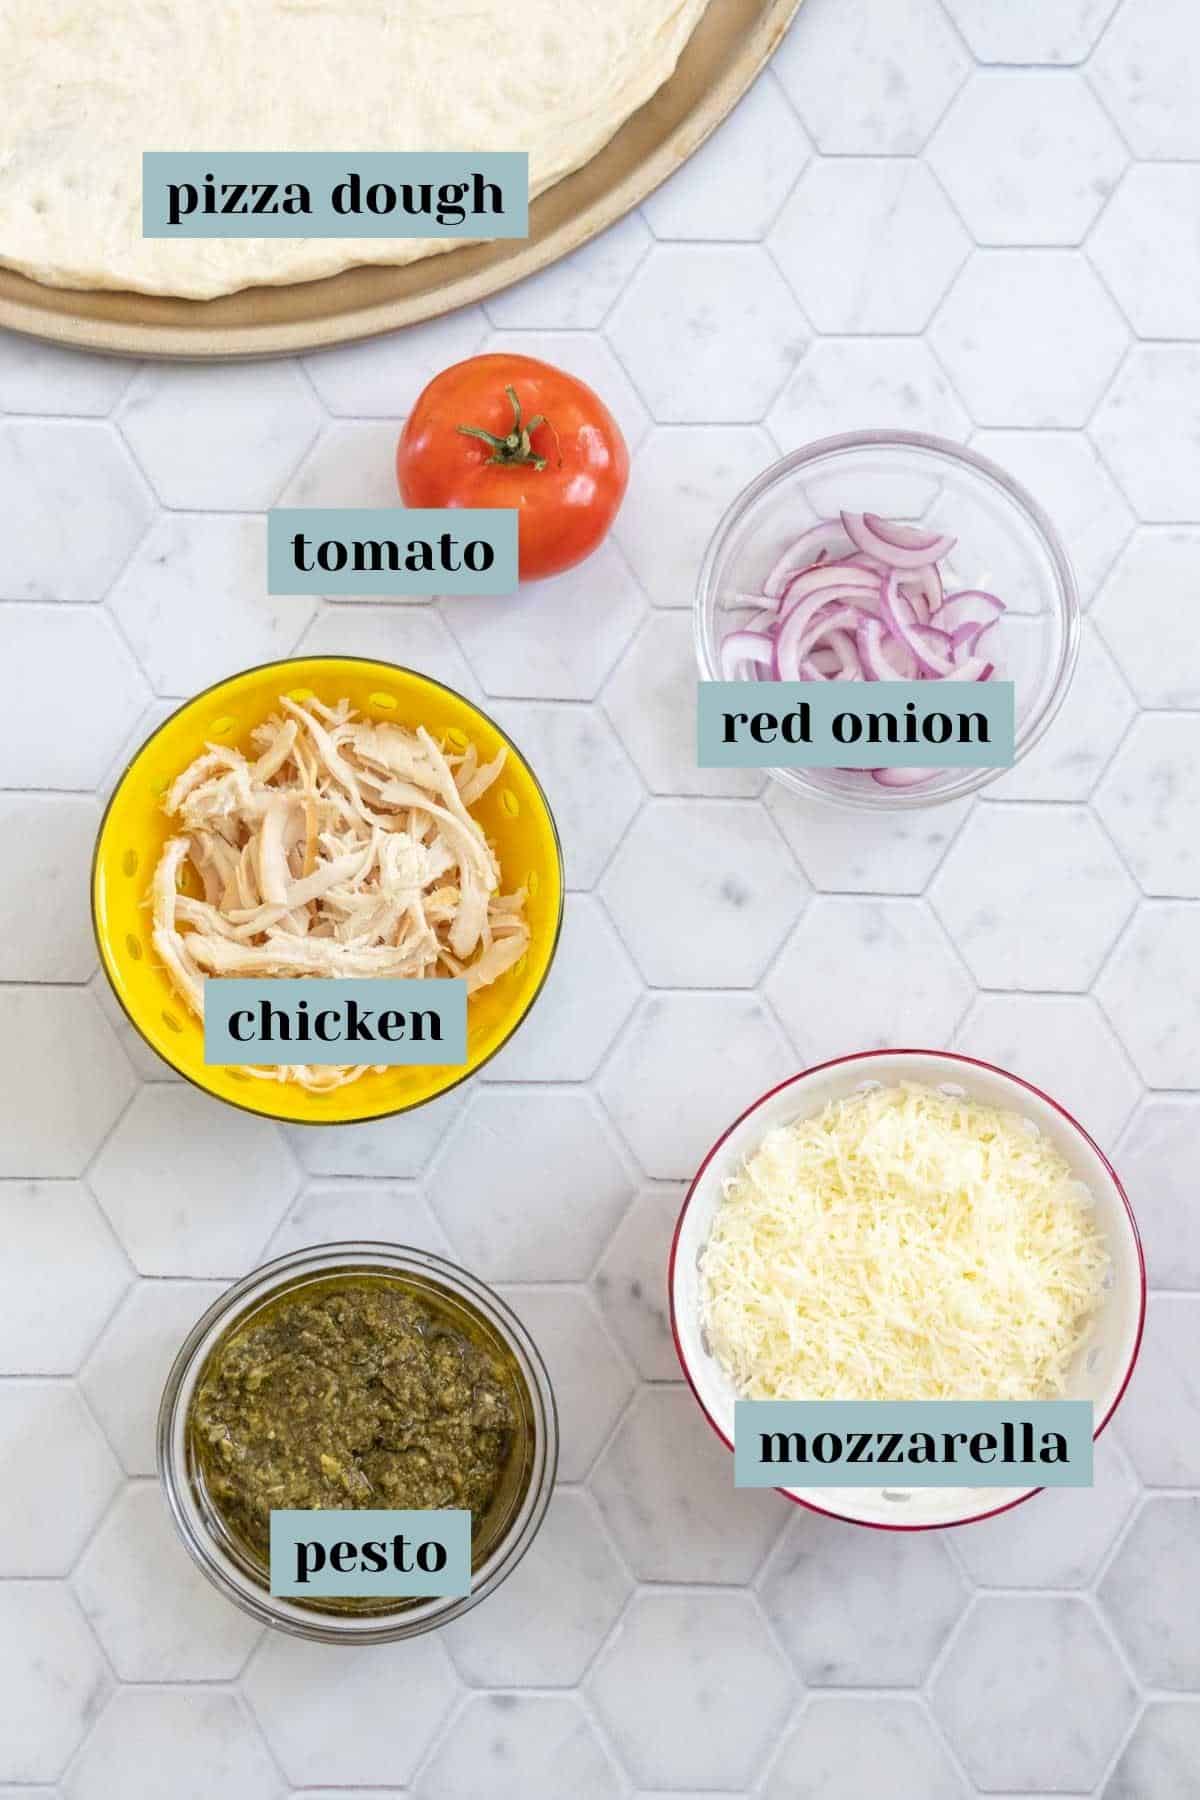 Ingredients for chicken pesto pizza on a tile surface with labels.